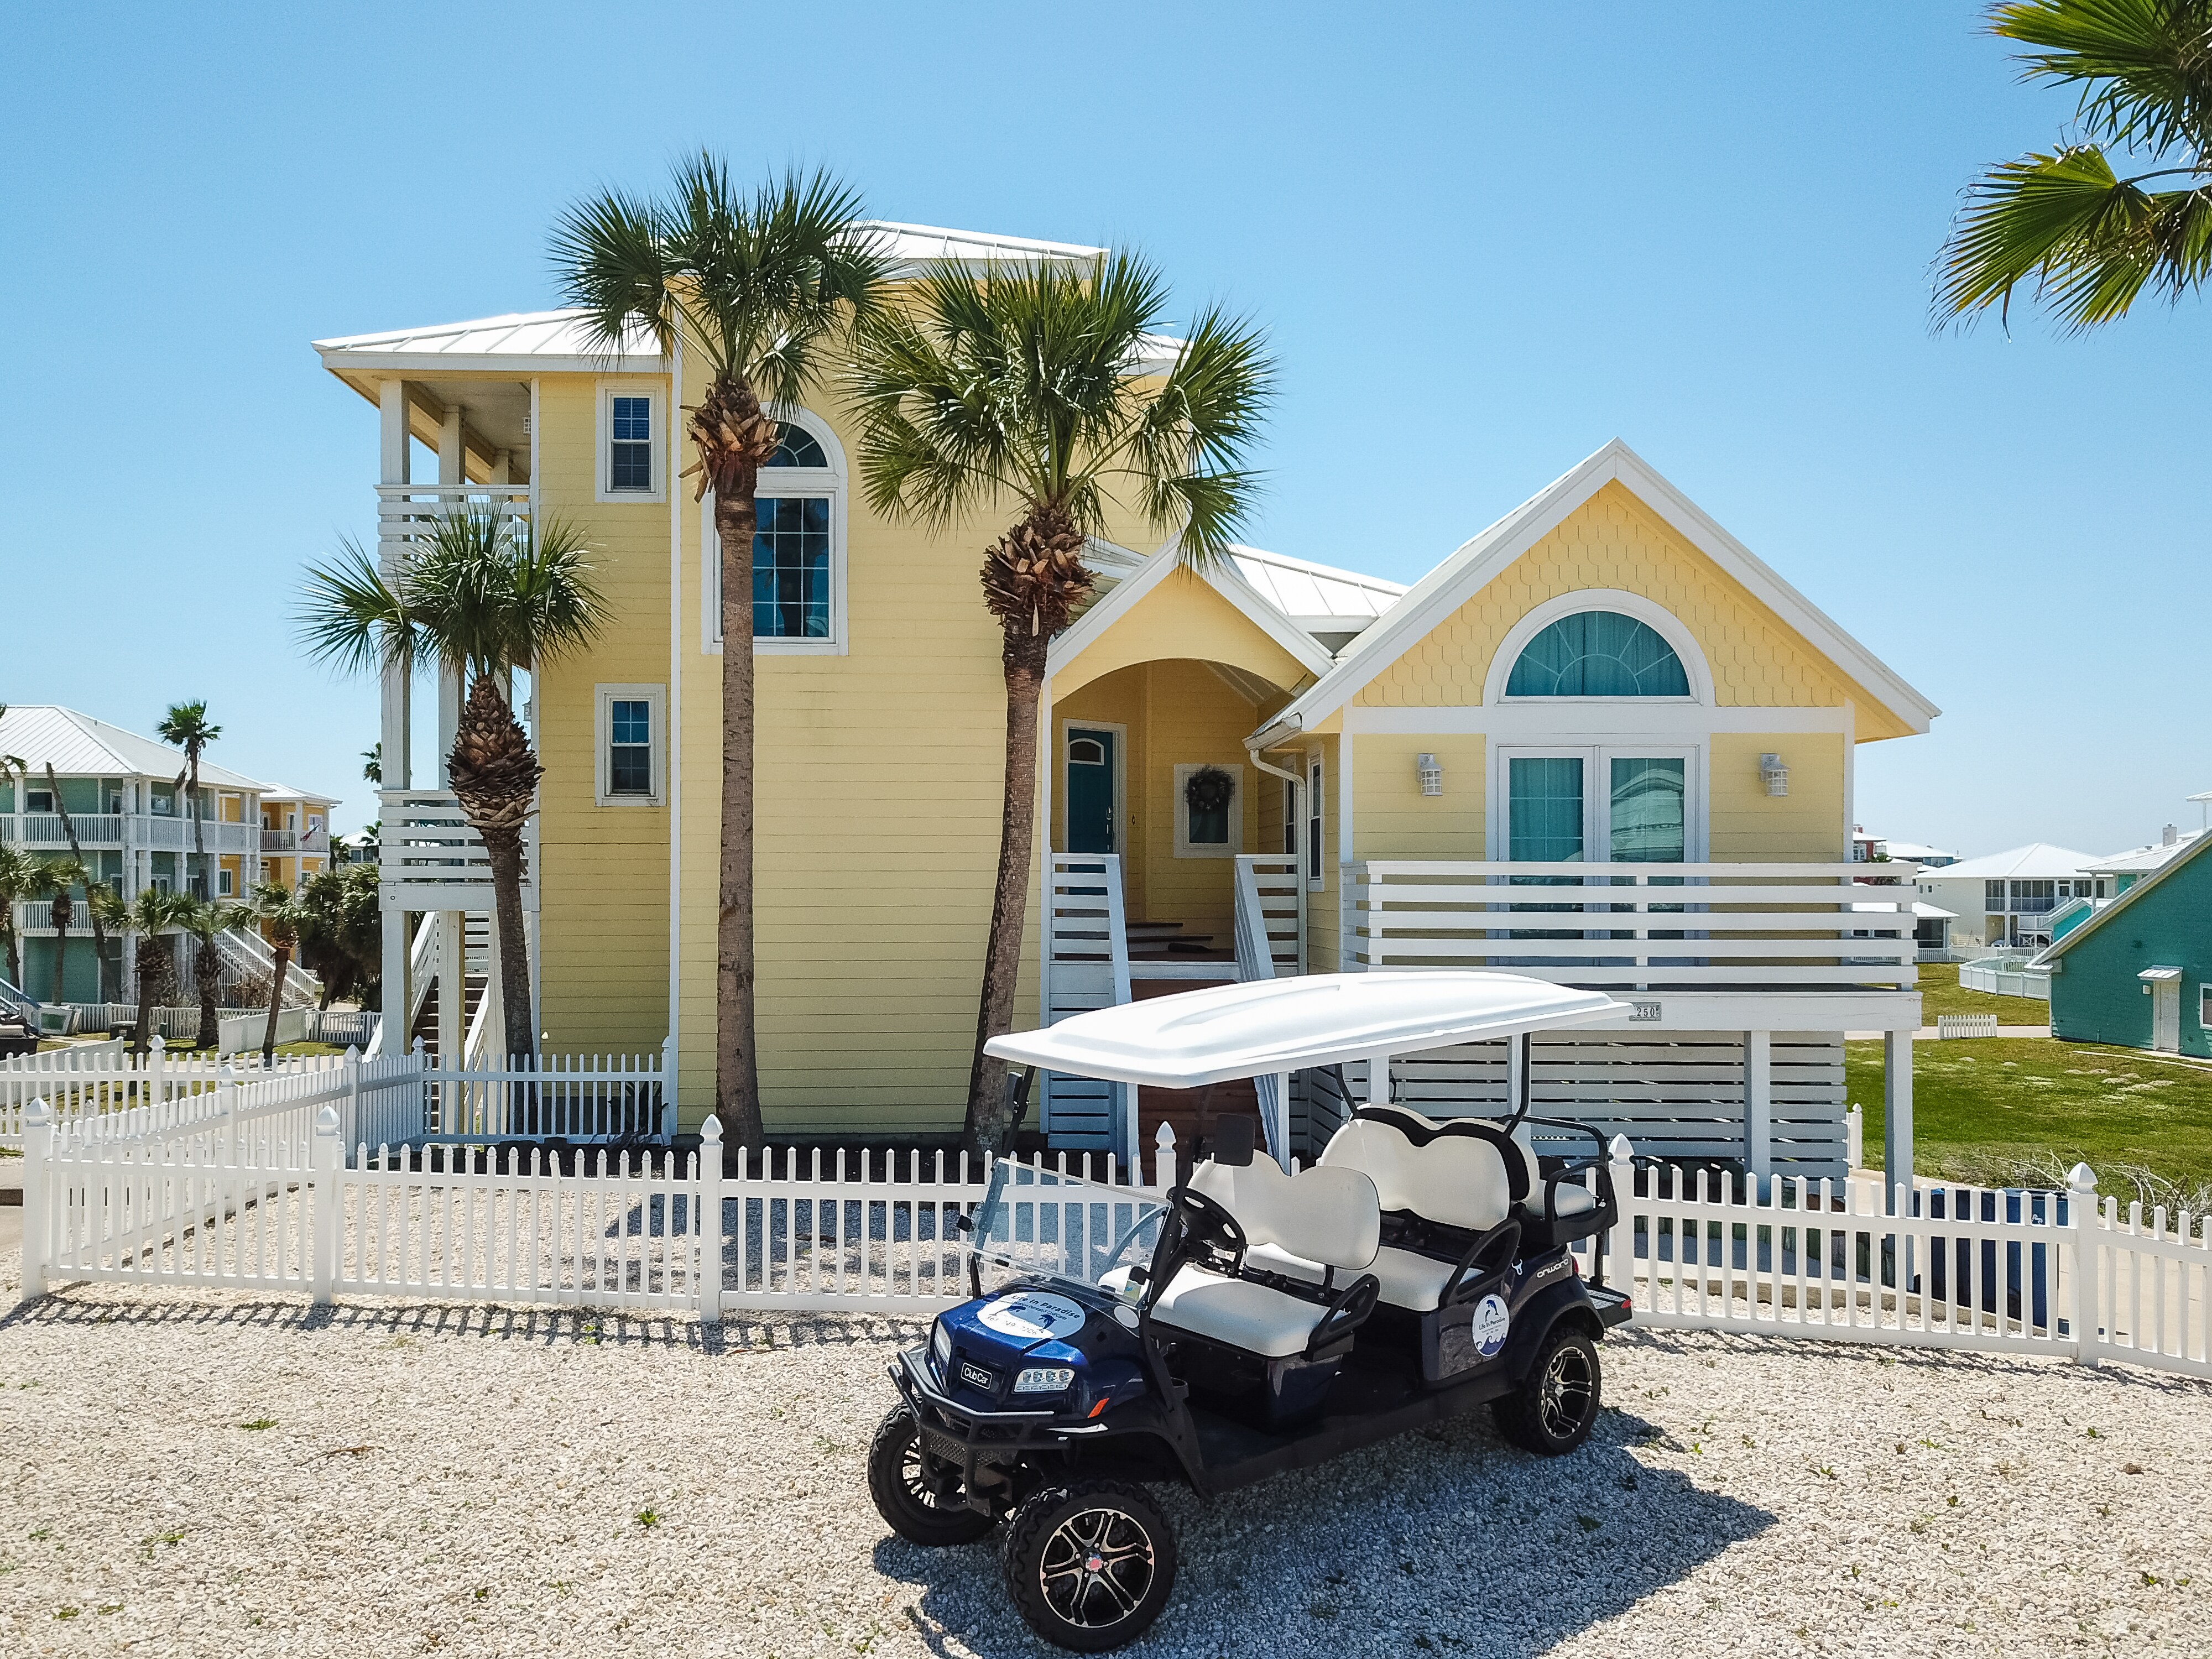 Property Image 1 - RD250  4BR,  3 Story Home, Close to Beach and Boardwalk, Shared Pool